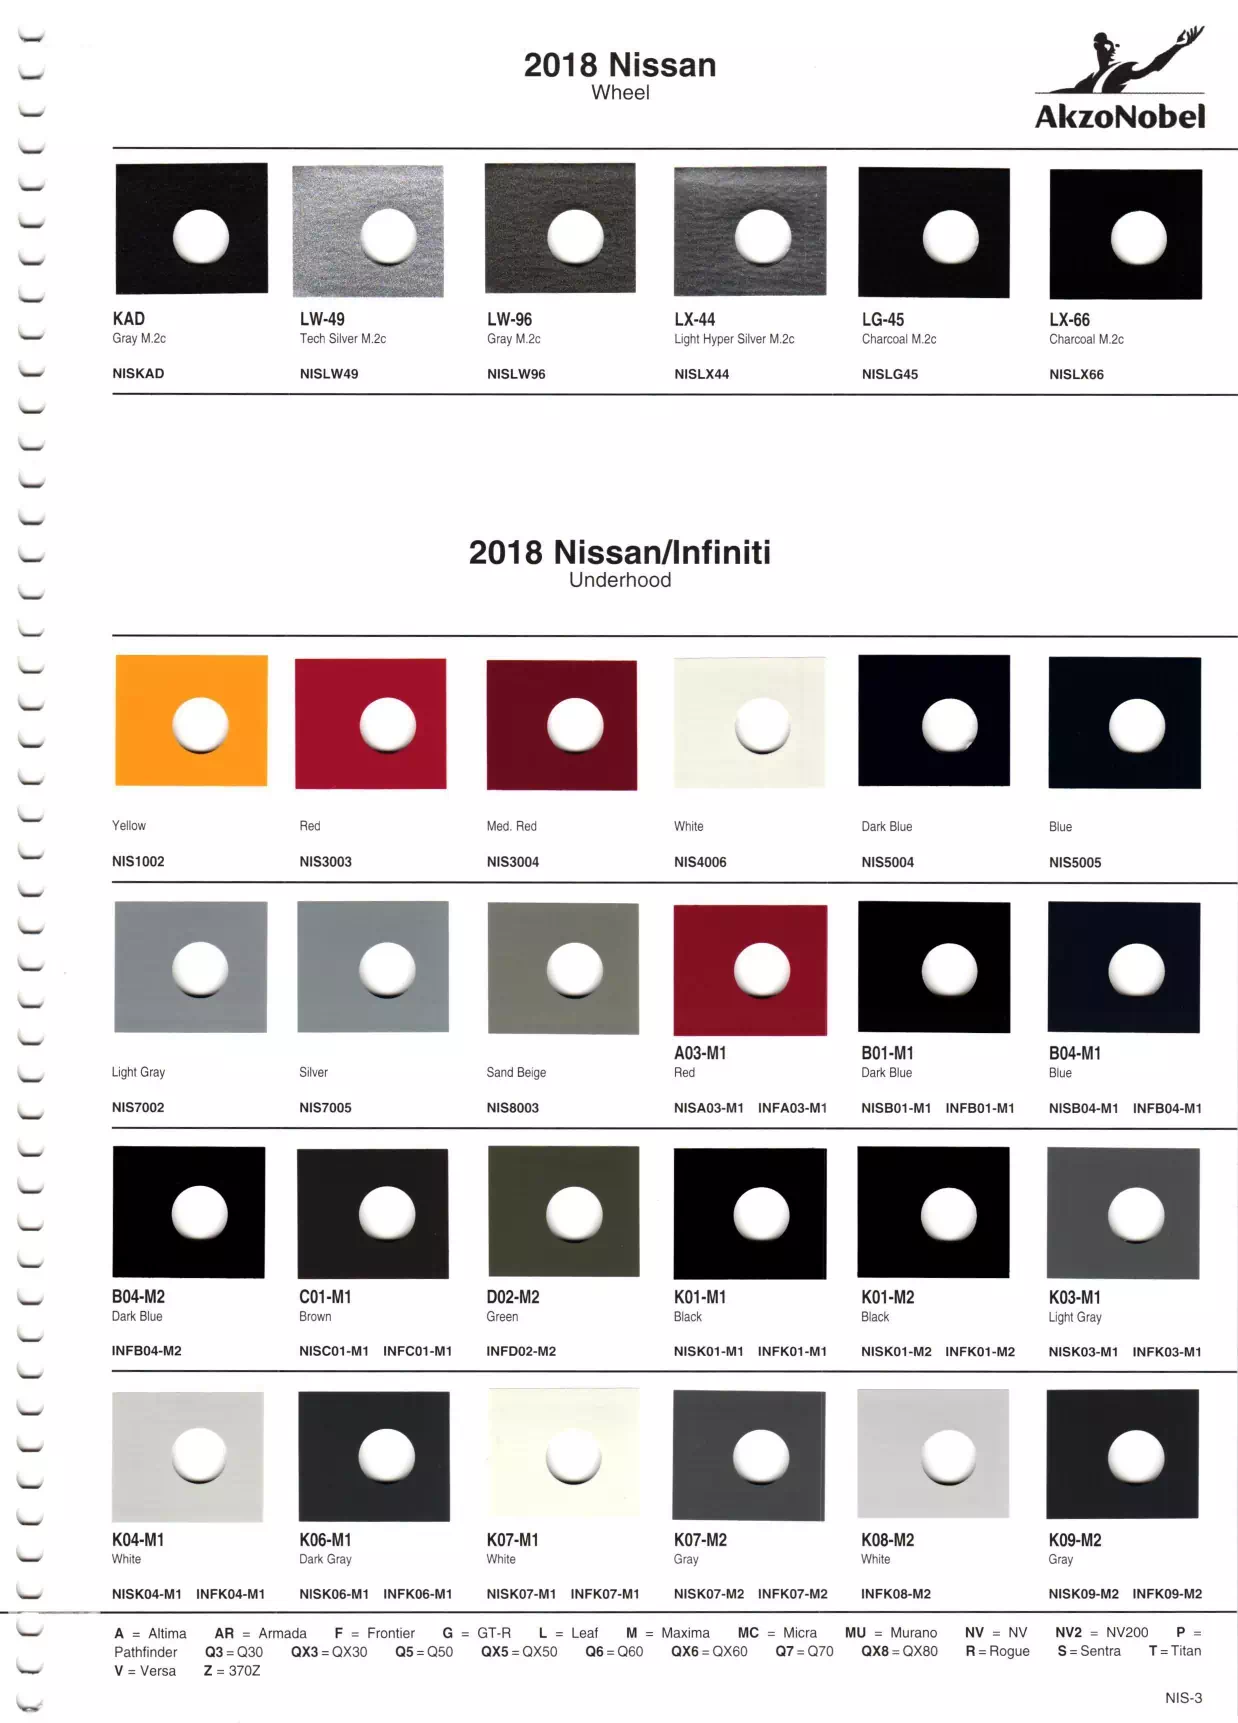 oem paint codes, color names, paint swatches for all 2018 Nissan and Infiniti models